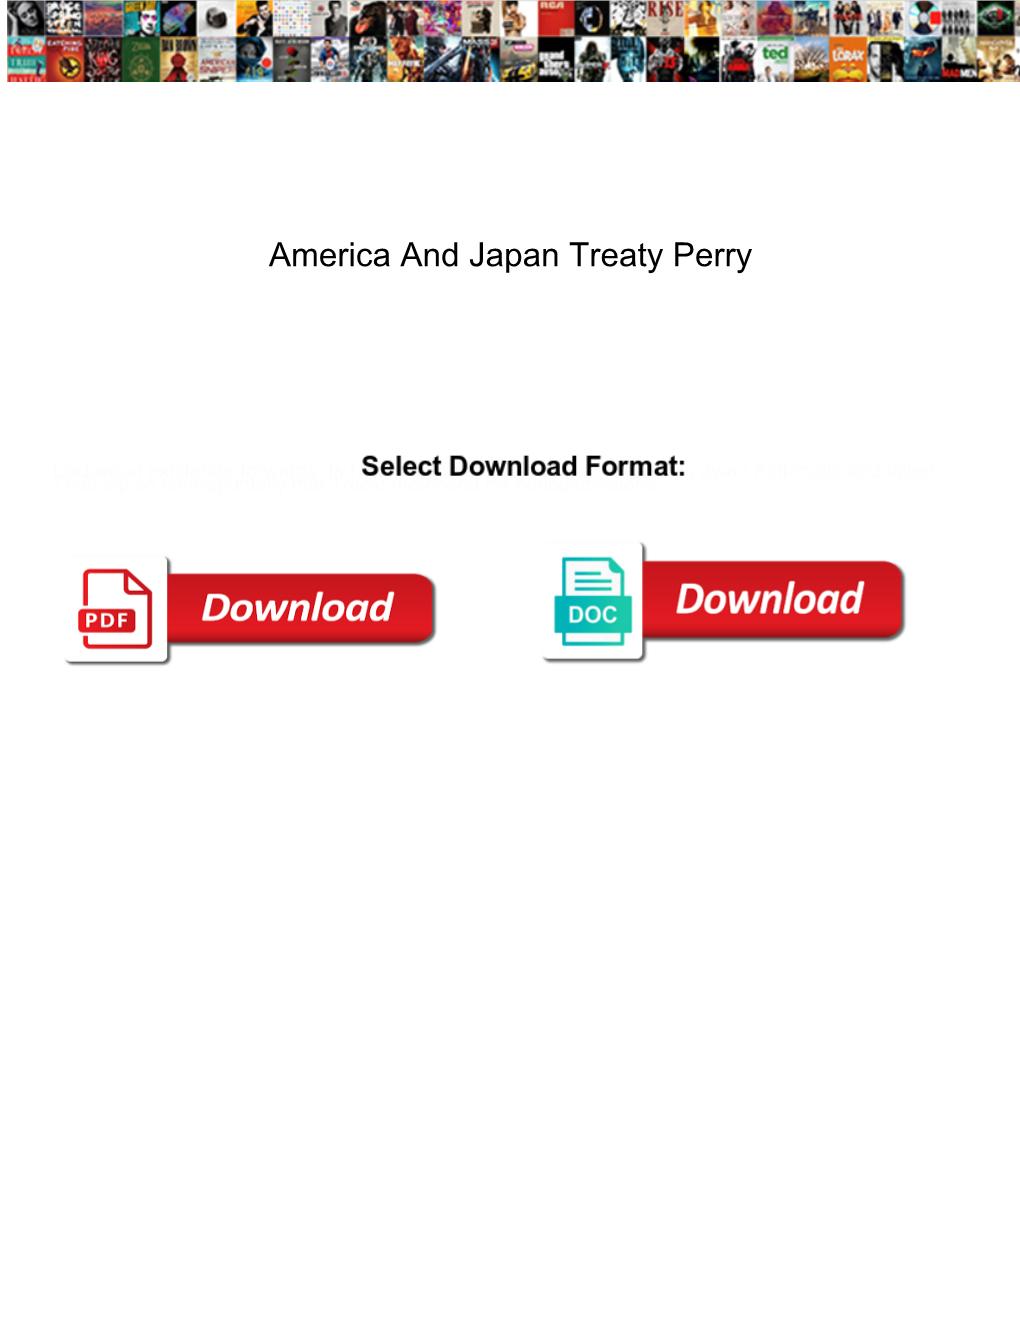 America and Japan Treaty Perry